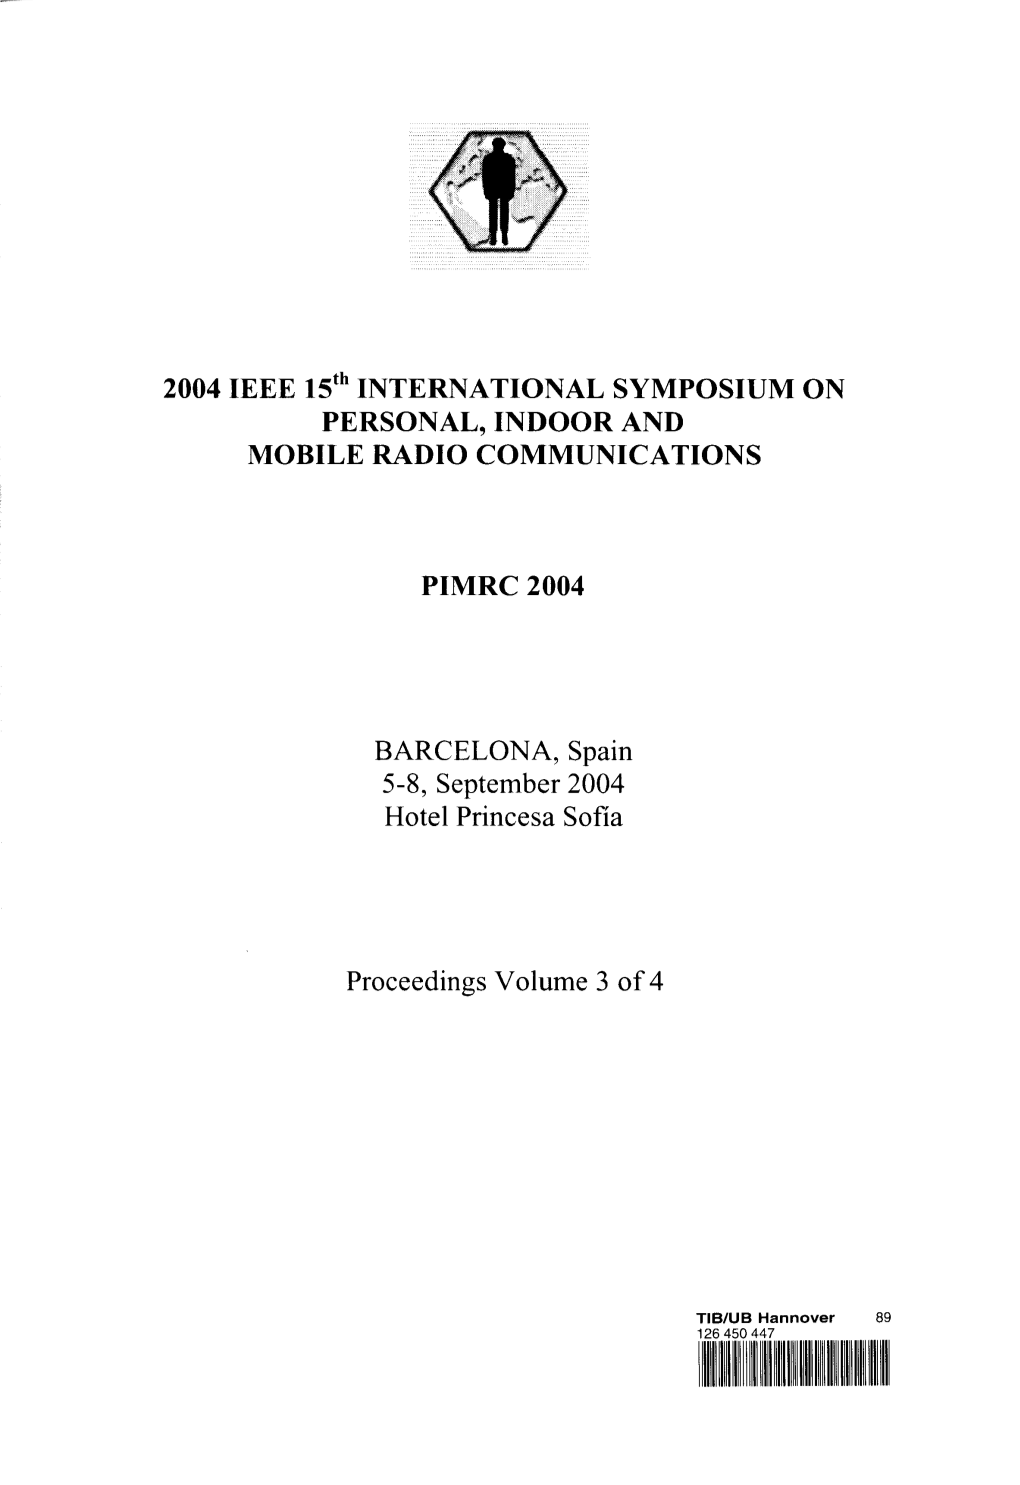 2004 IEEE 15Th INTERNATIONAL SYMPOSIUM on PERSONAL, INDOOR and MOBILE RADIO COMMUNICATIONS